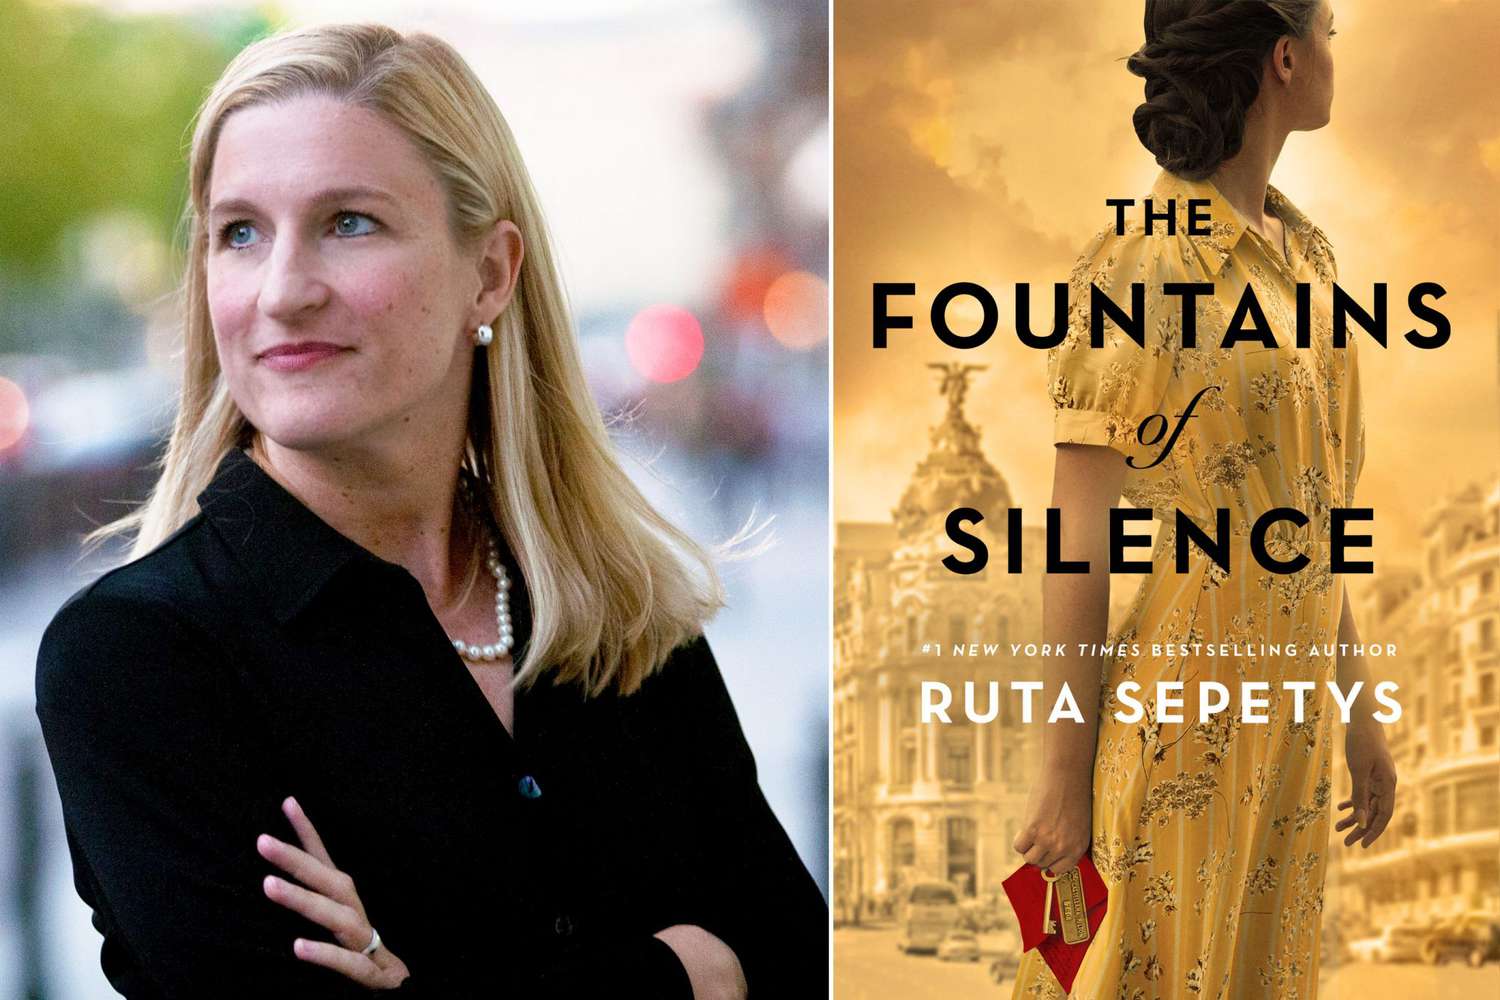 Fountains of Silence: See Ruta Sepetys' tour schedule | EW.com